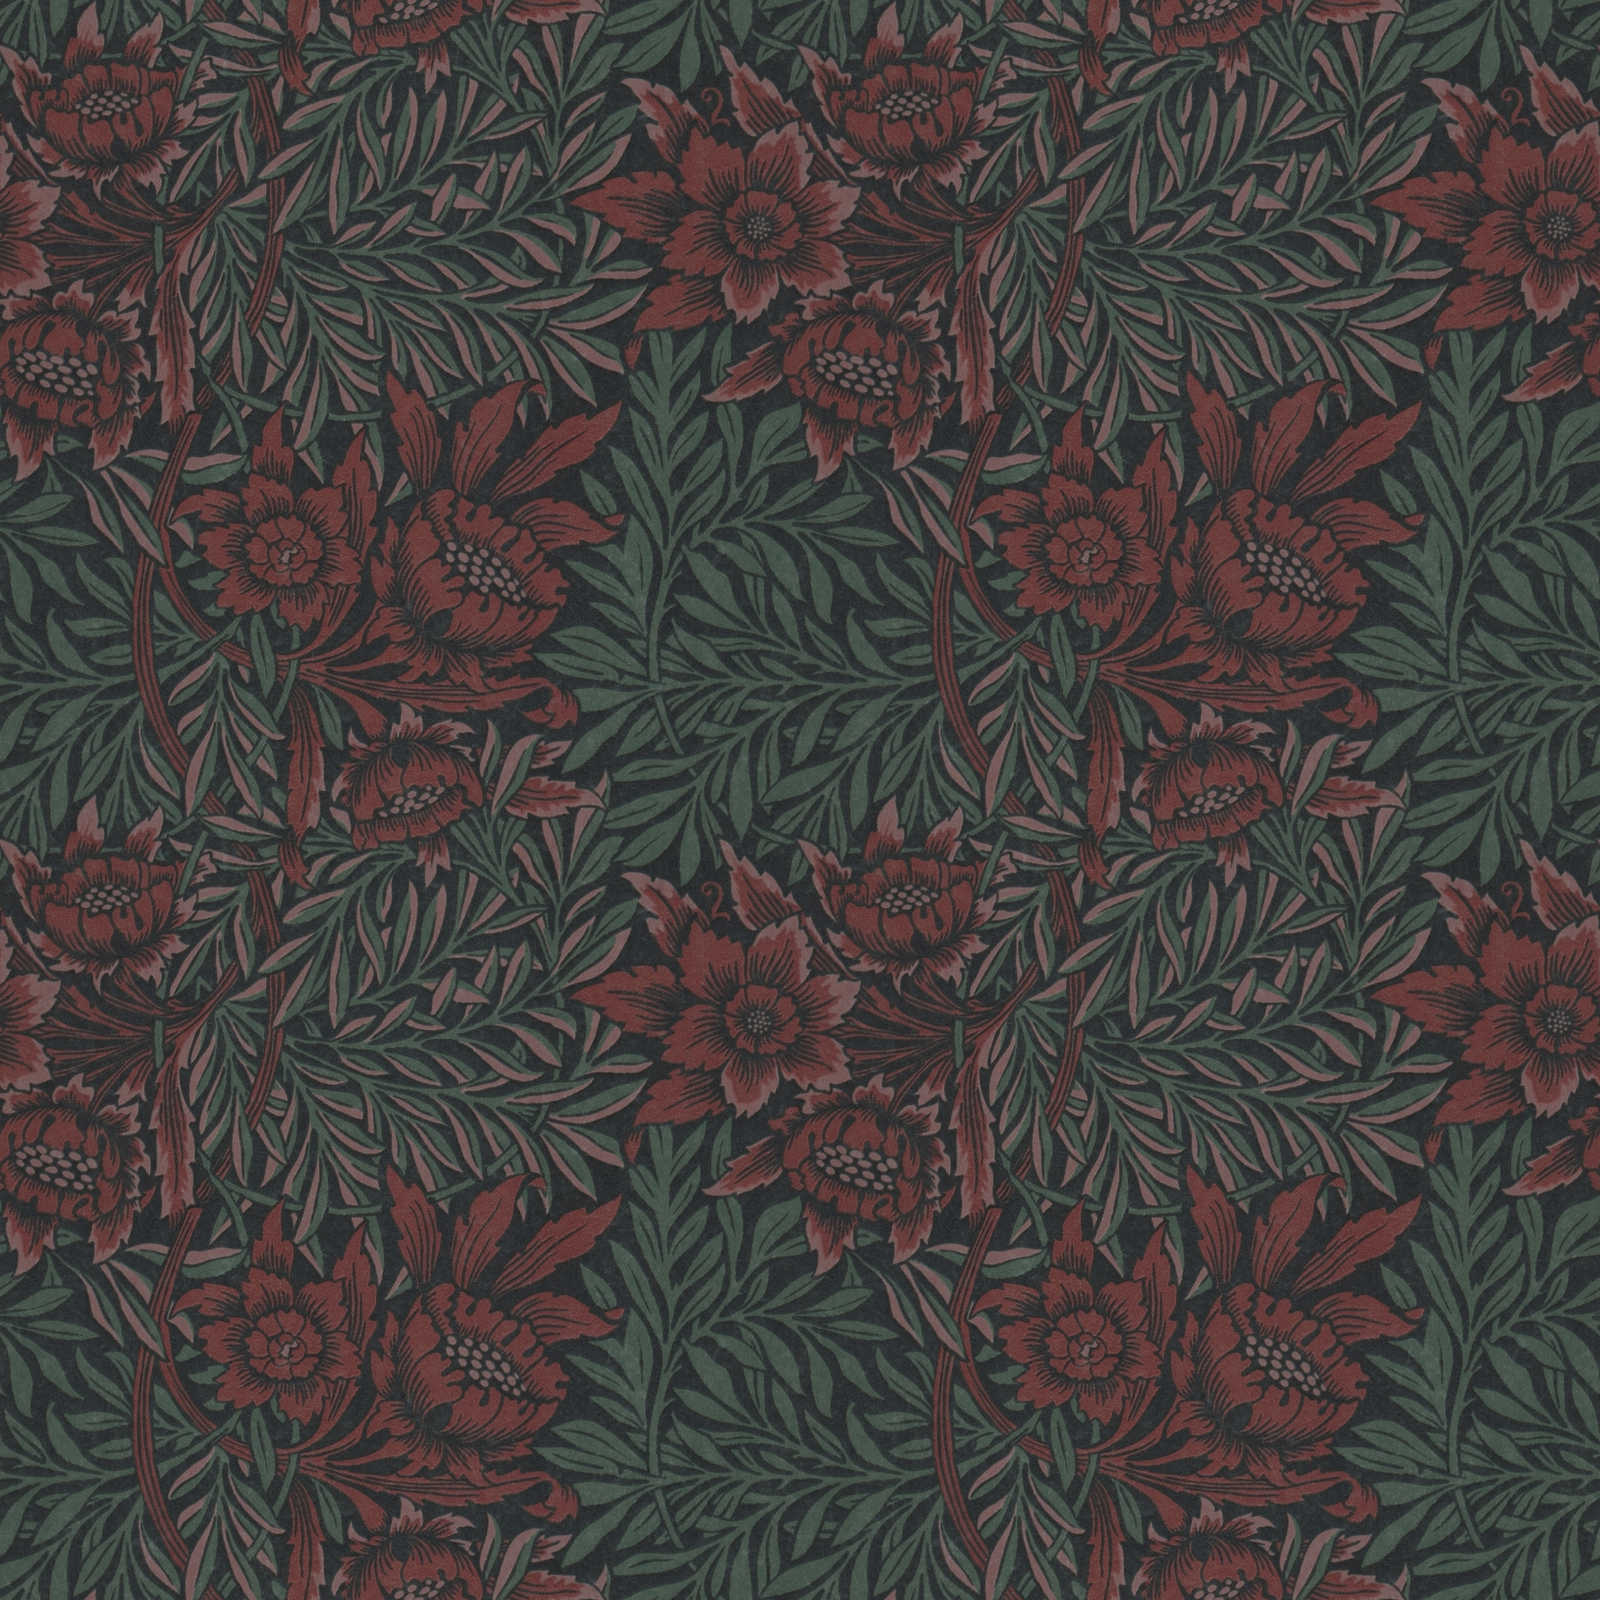         Non-woven wallpaper with floral pattern large flower and tendrils - green, red, black
    